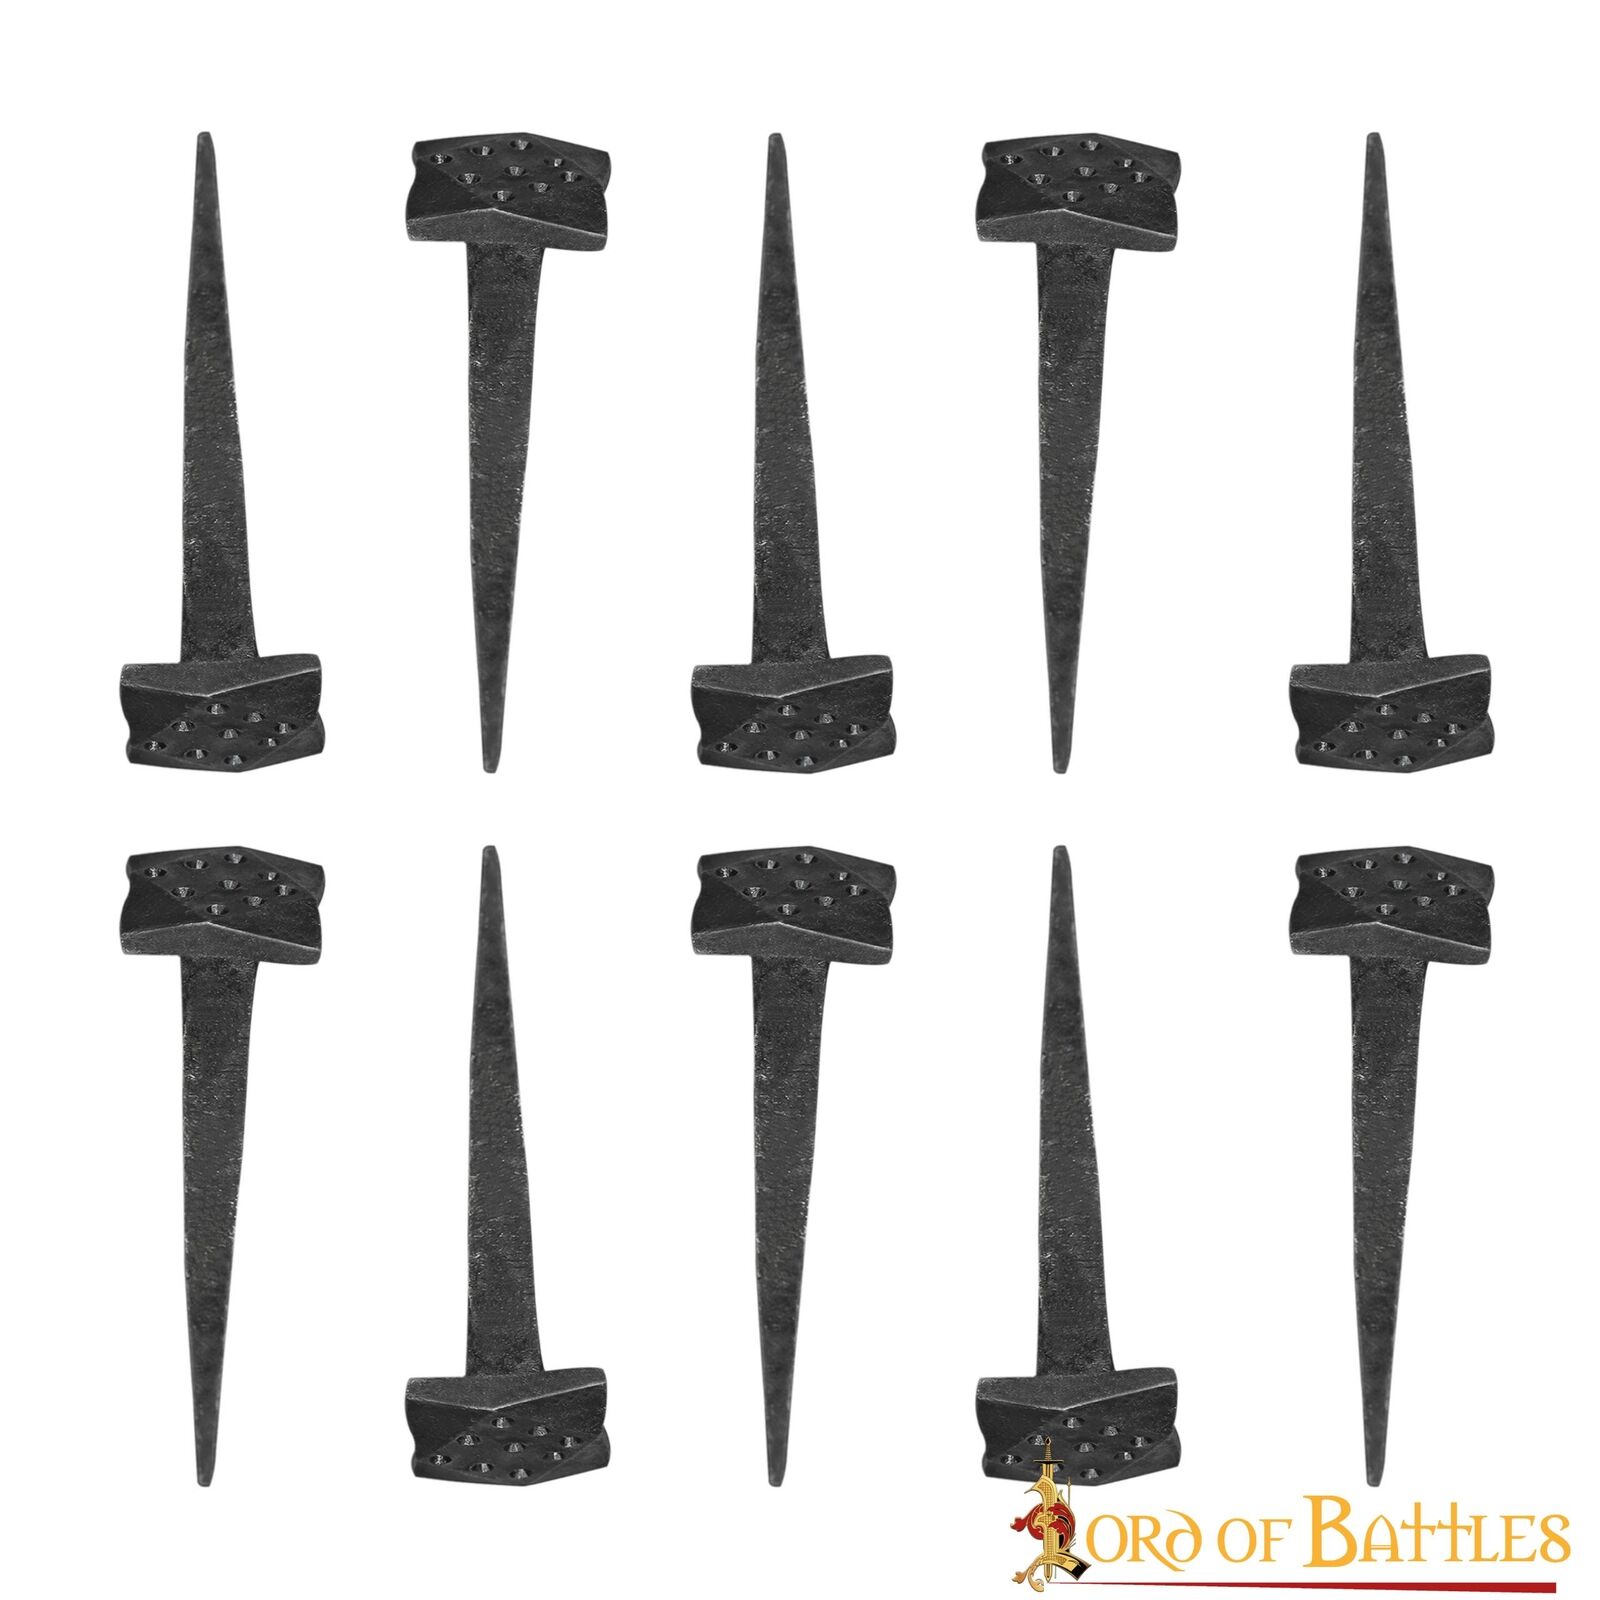 Medieval Decoration Nails Hardware Hand Forged Iron Door Decor Studs Set of 10